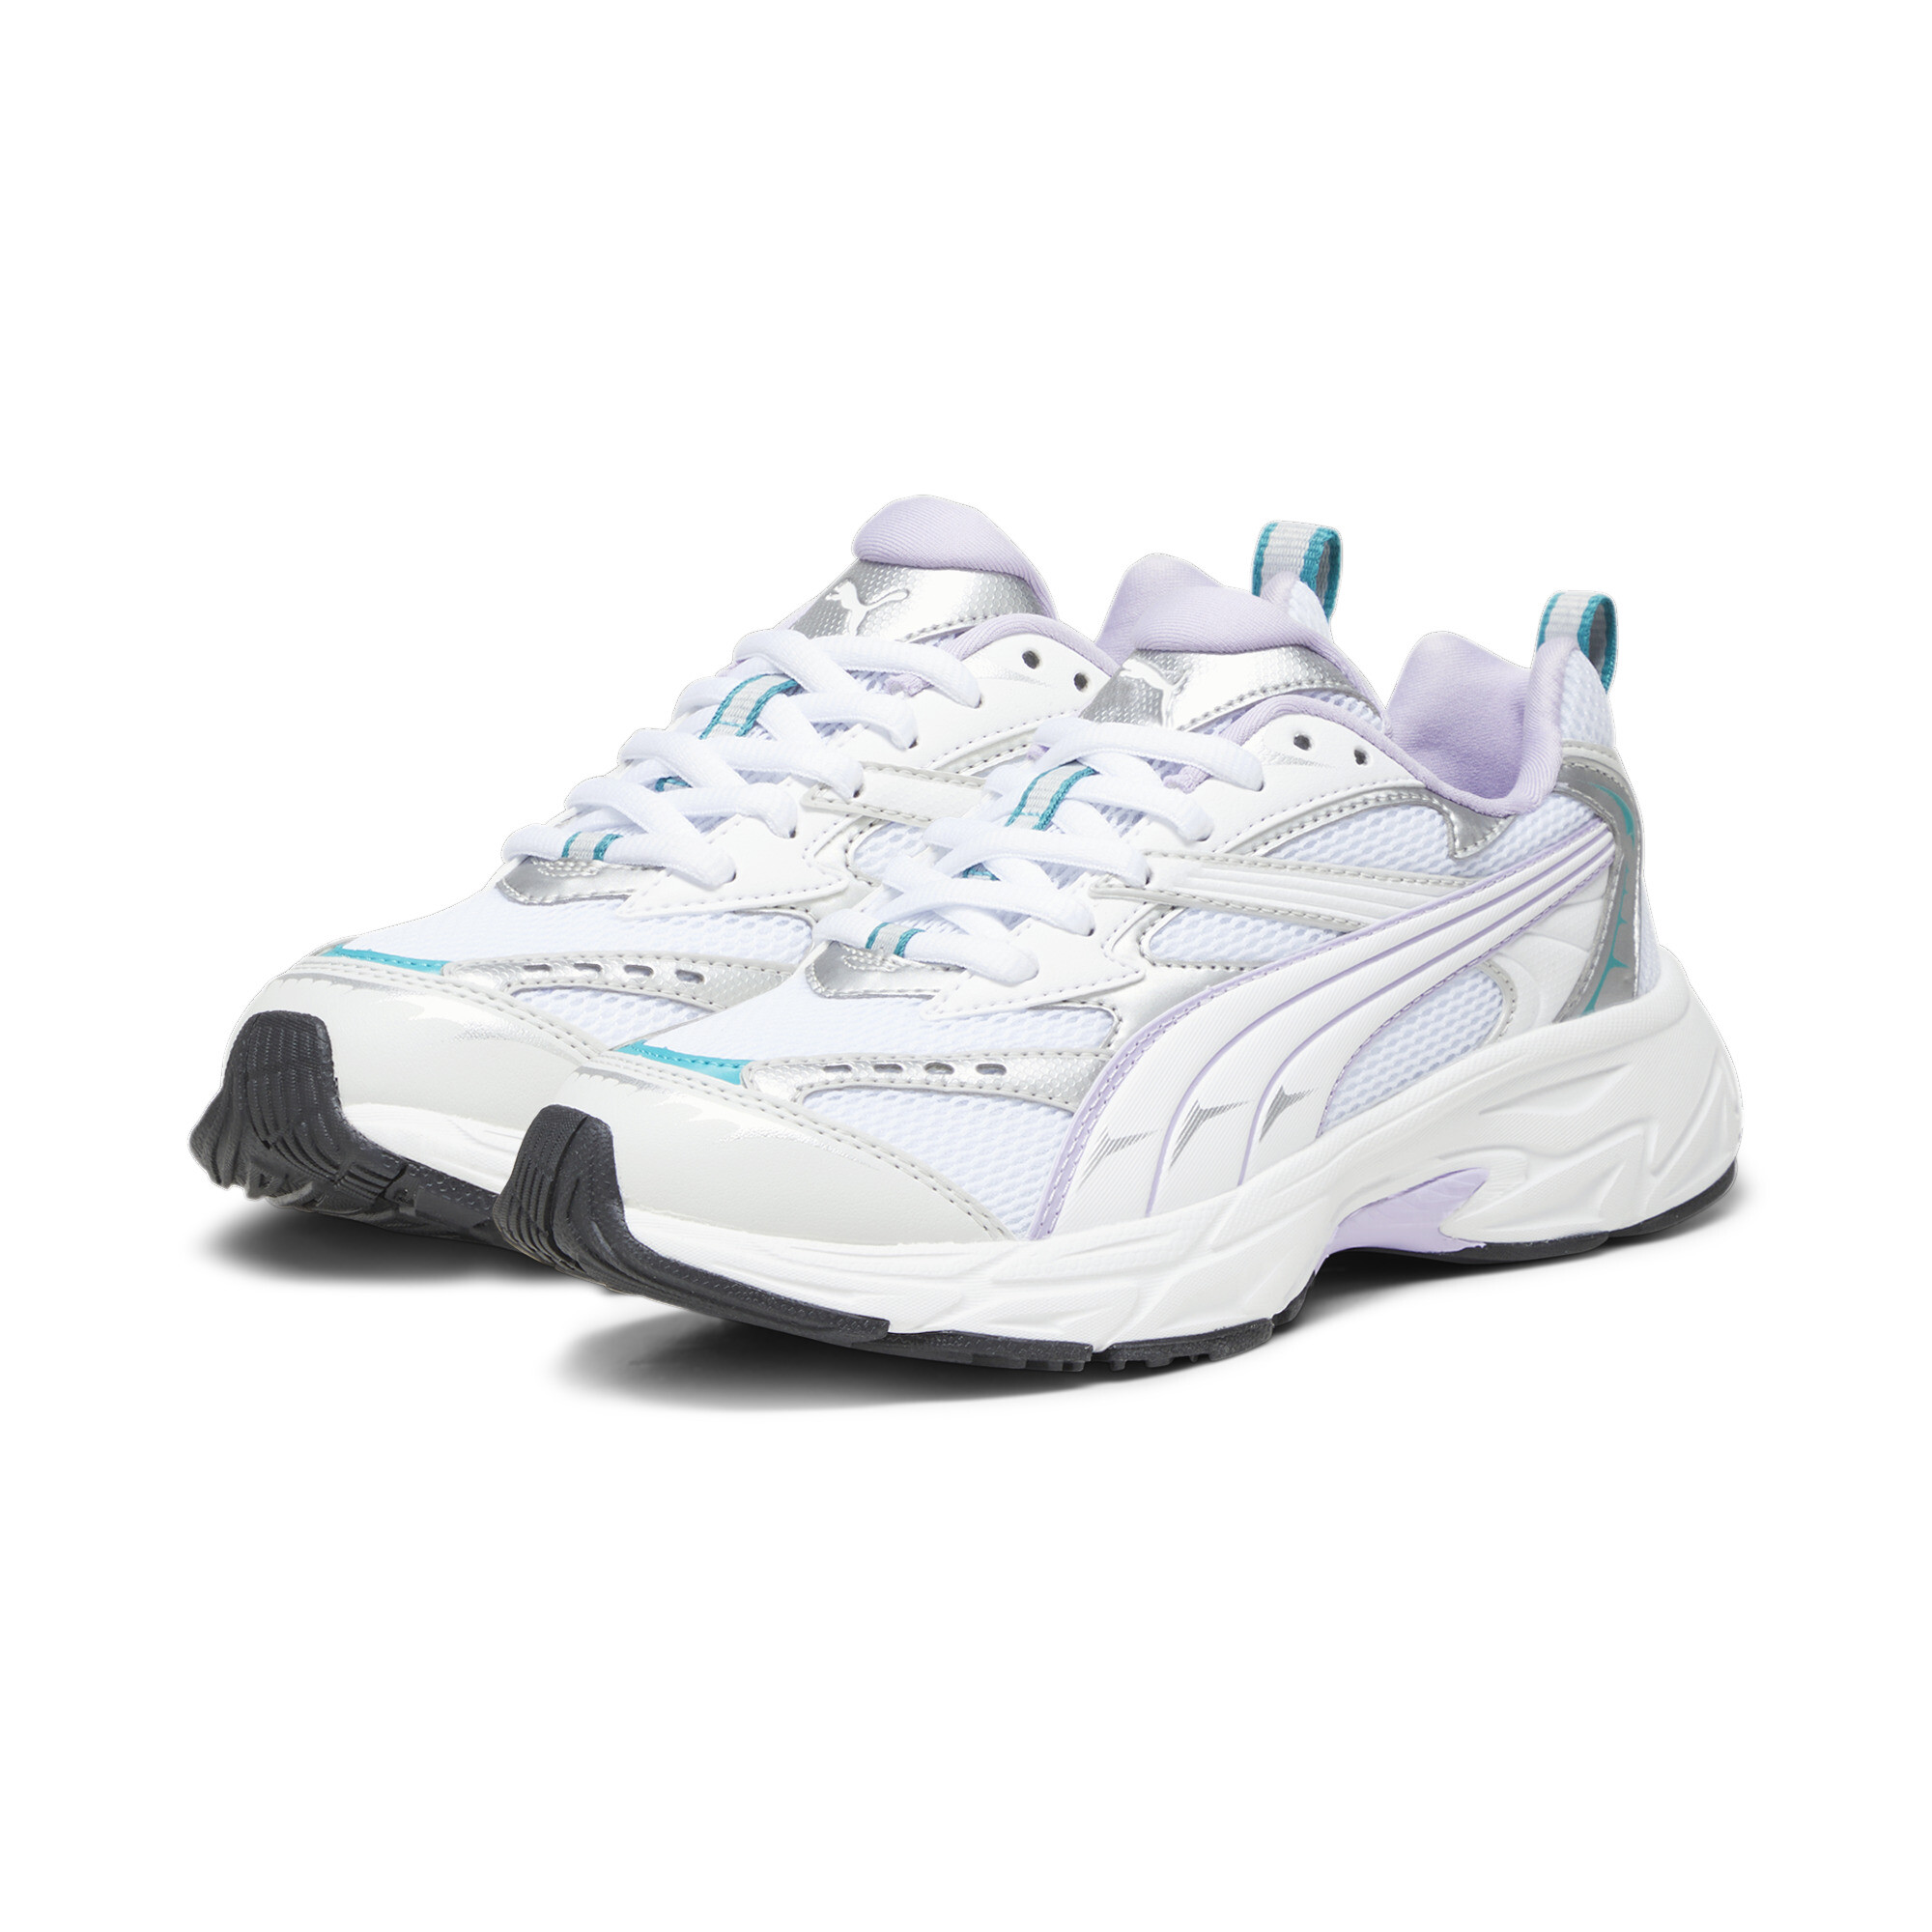 Puma Morphic Sneakers, White, Size 36, Shoes